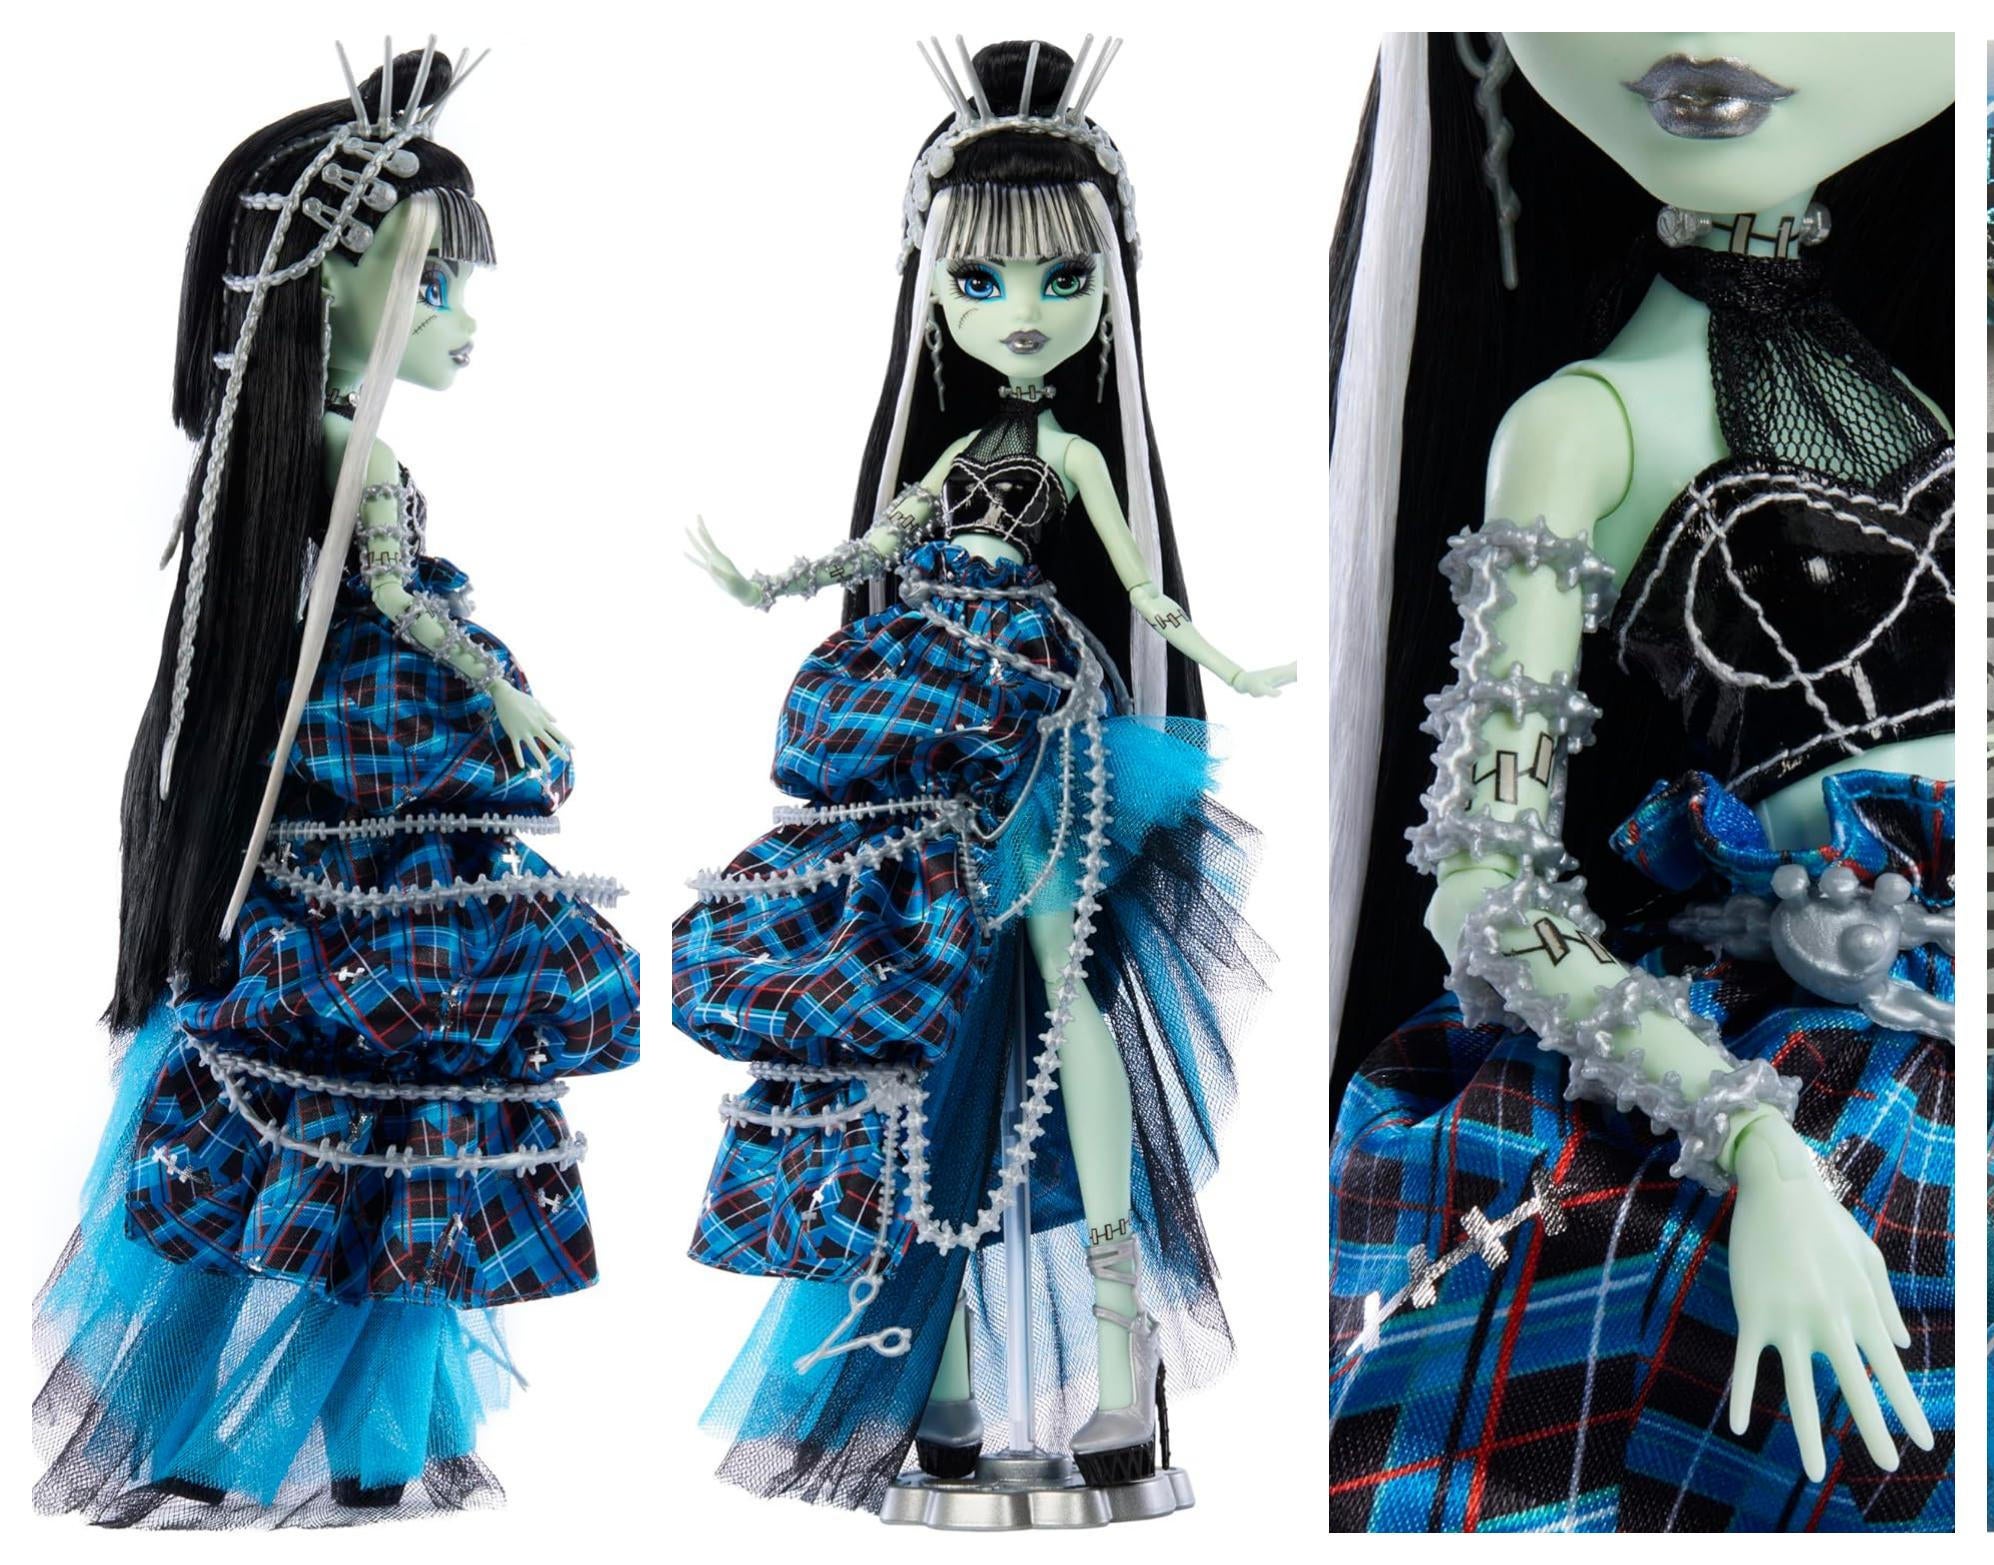 Monster High Frankie Stein Doll with Original Sculpt, Stitched in Style  Collector Doll with Deconstructed Gown and Sewing-Inspired Accessories  (